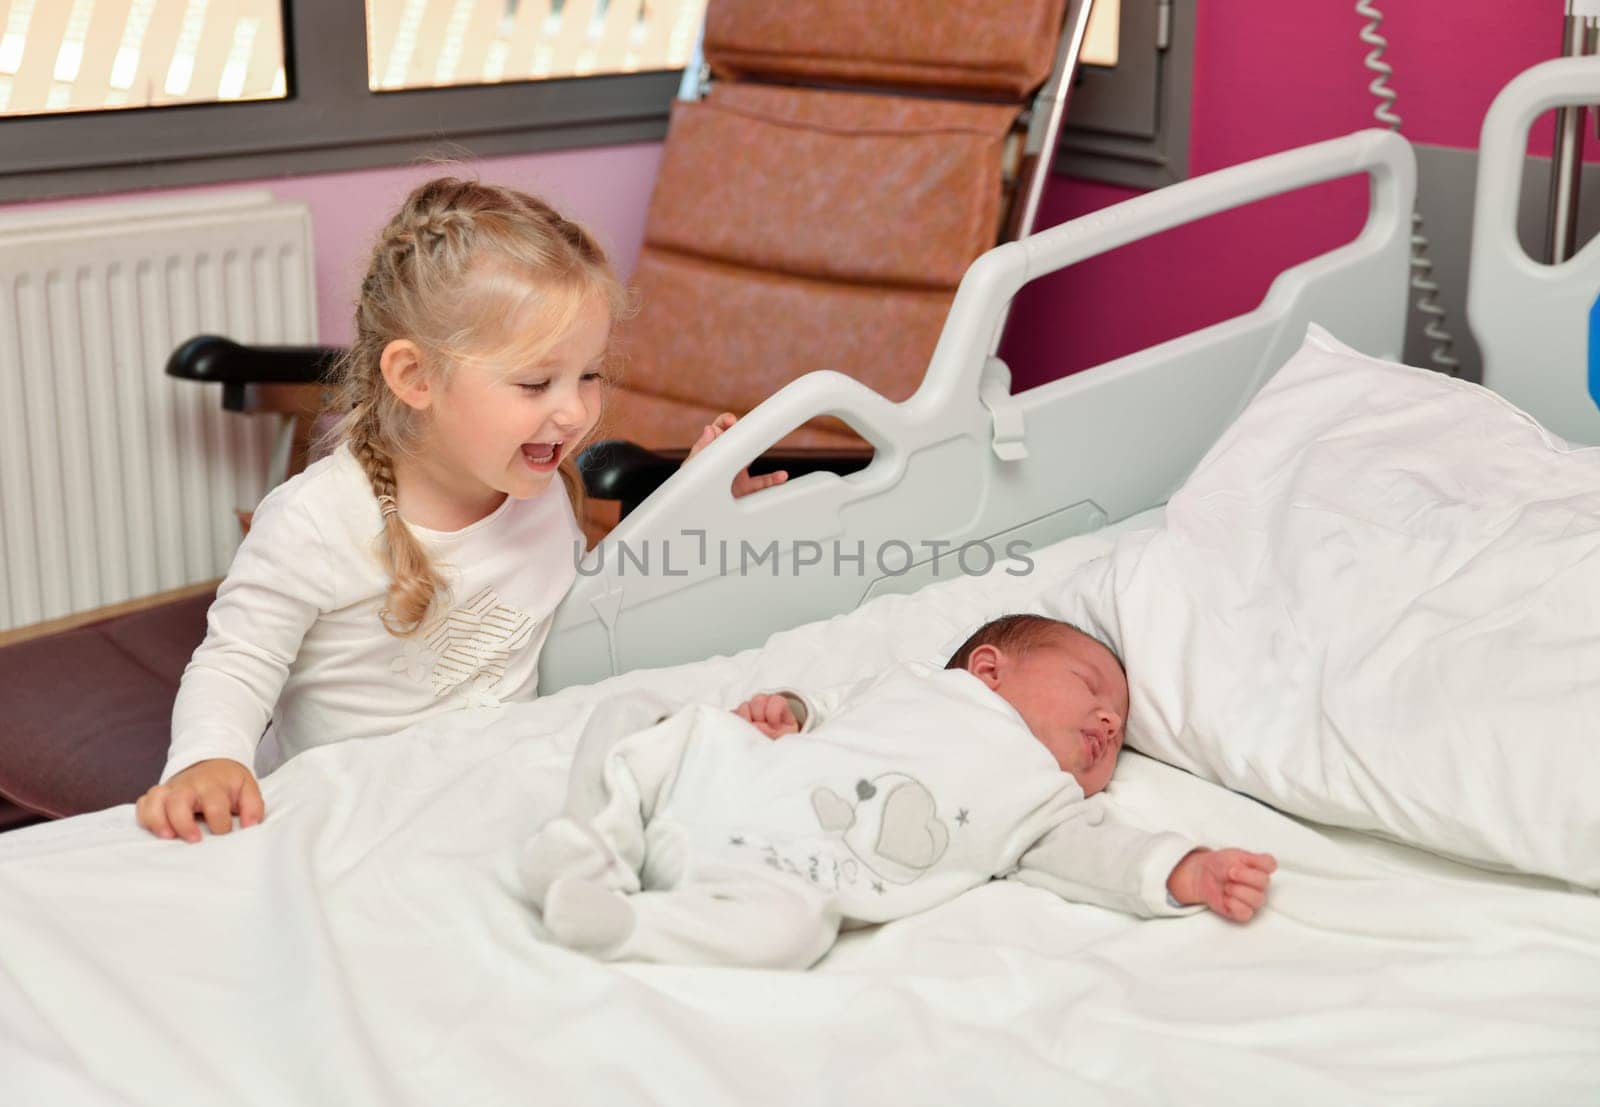 The first acquaintance between a sister and a newborn baby in the hospital ward